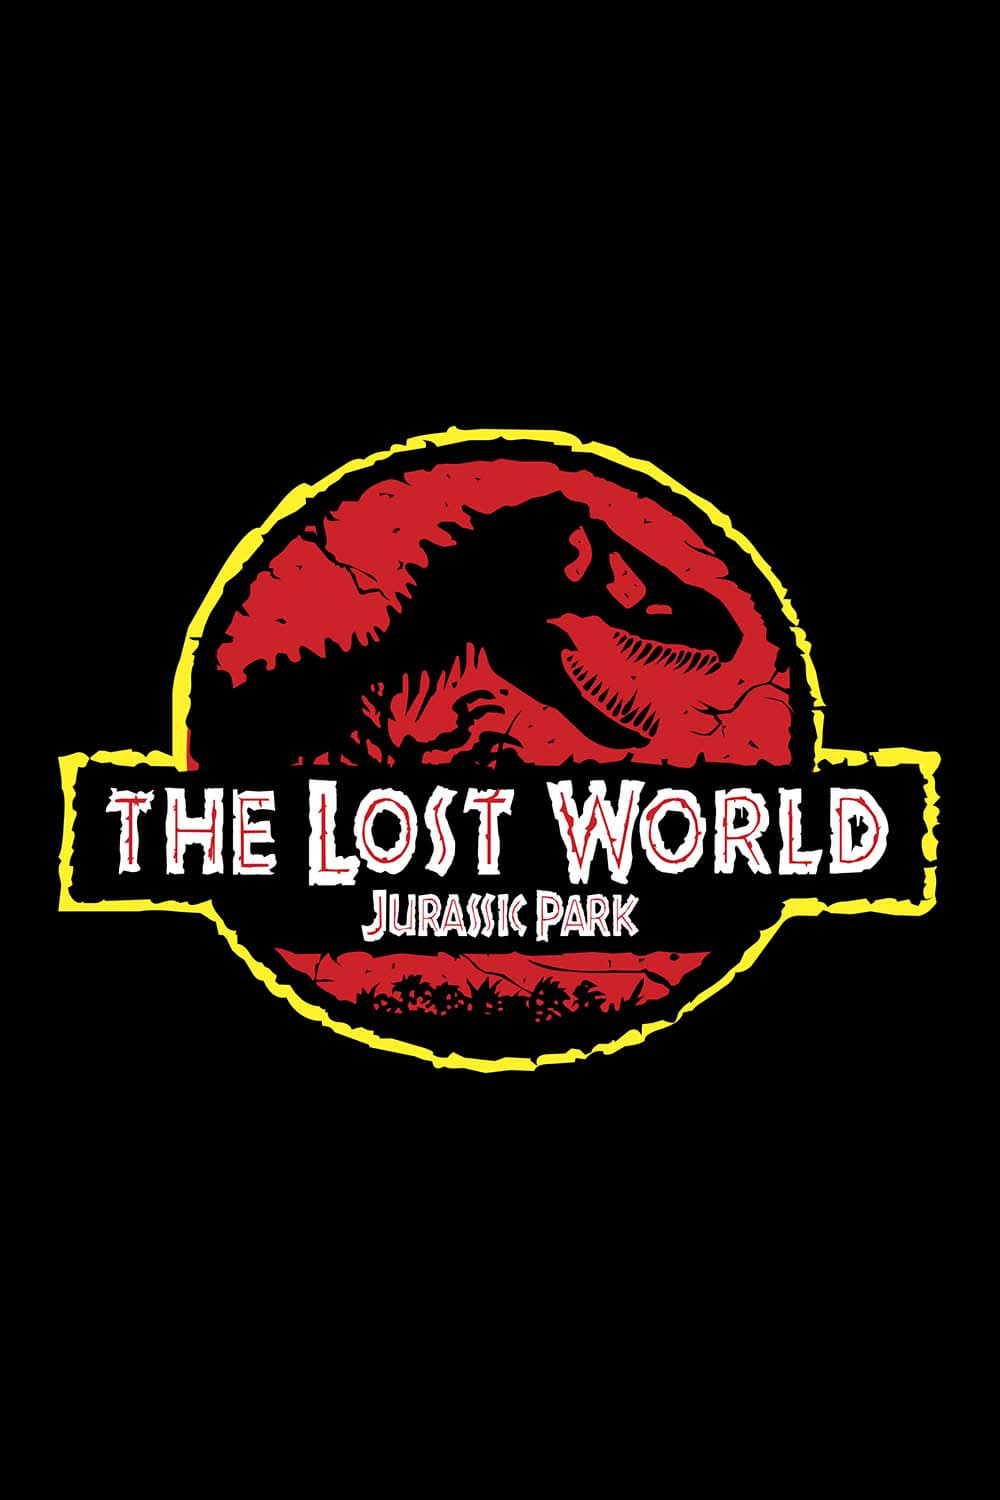 Today is the 25th anniversary of The Lost World. I8wlSMWY20ILjAfoscV3KRJ3iYa